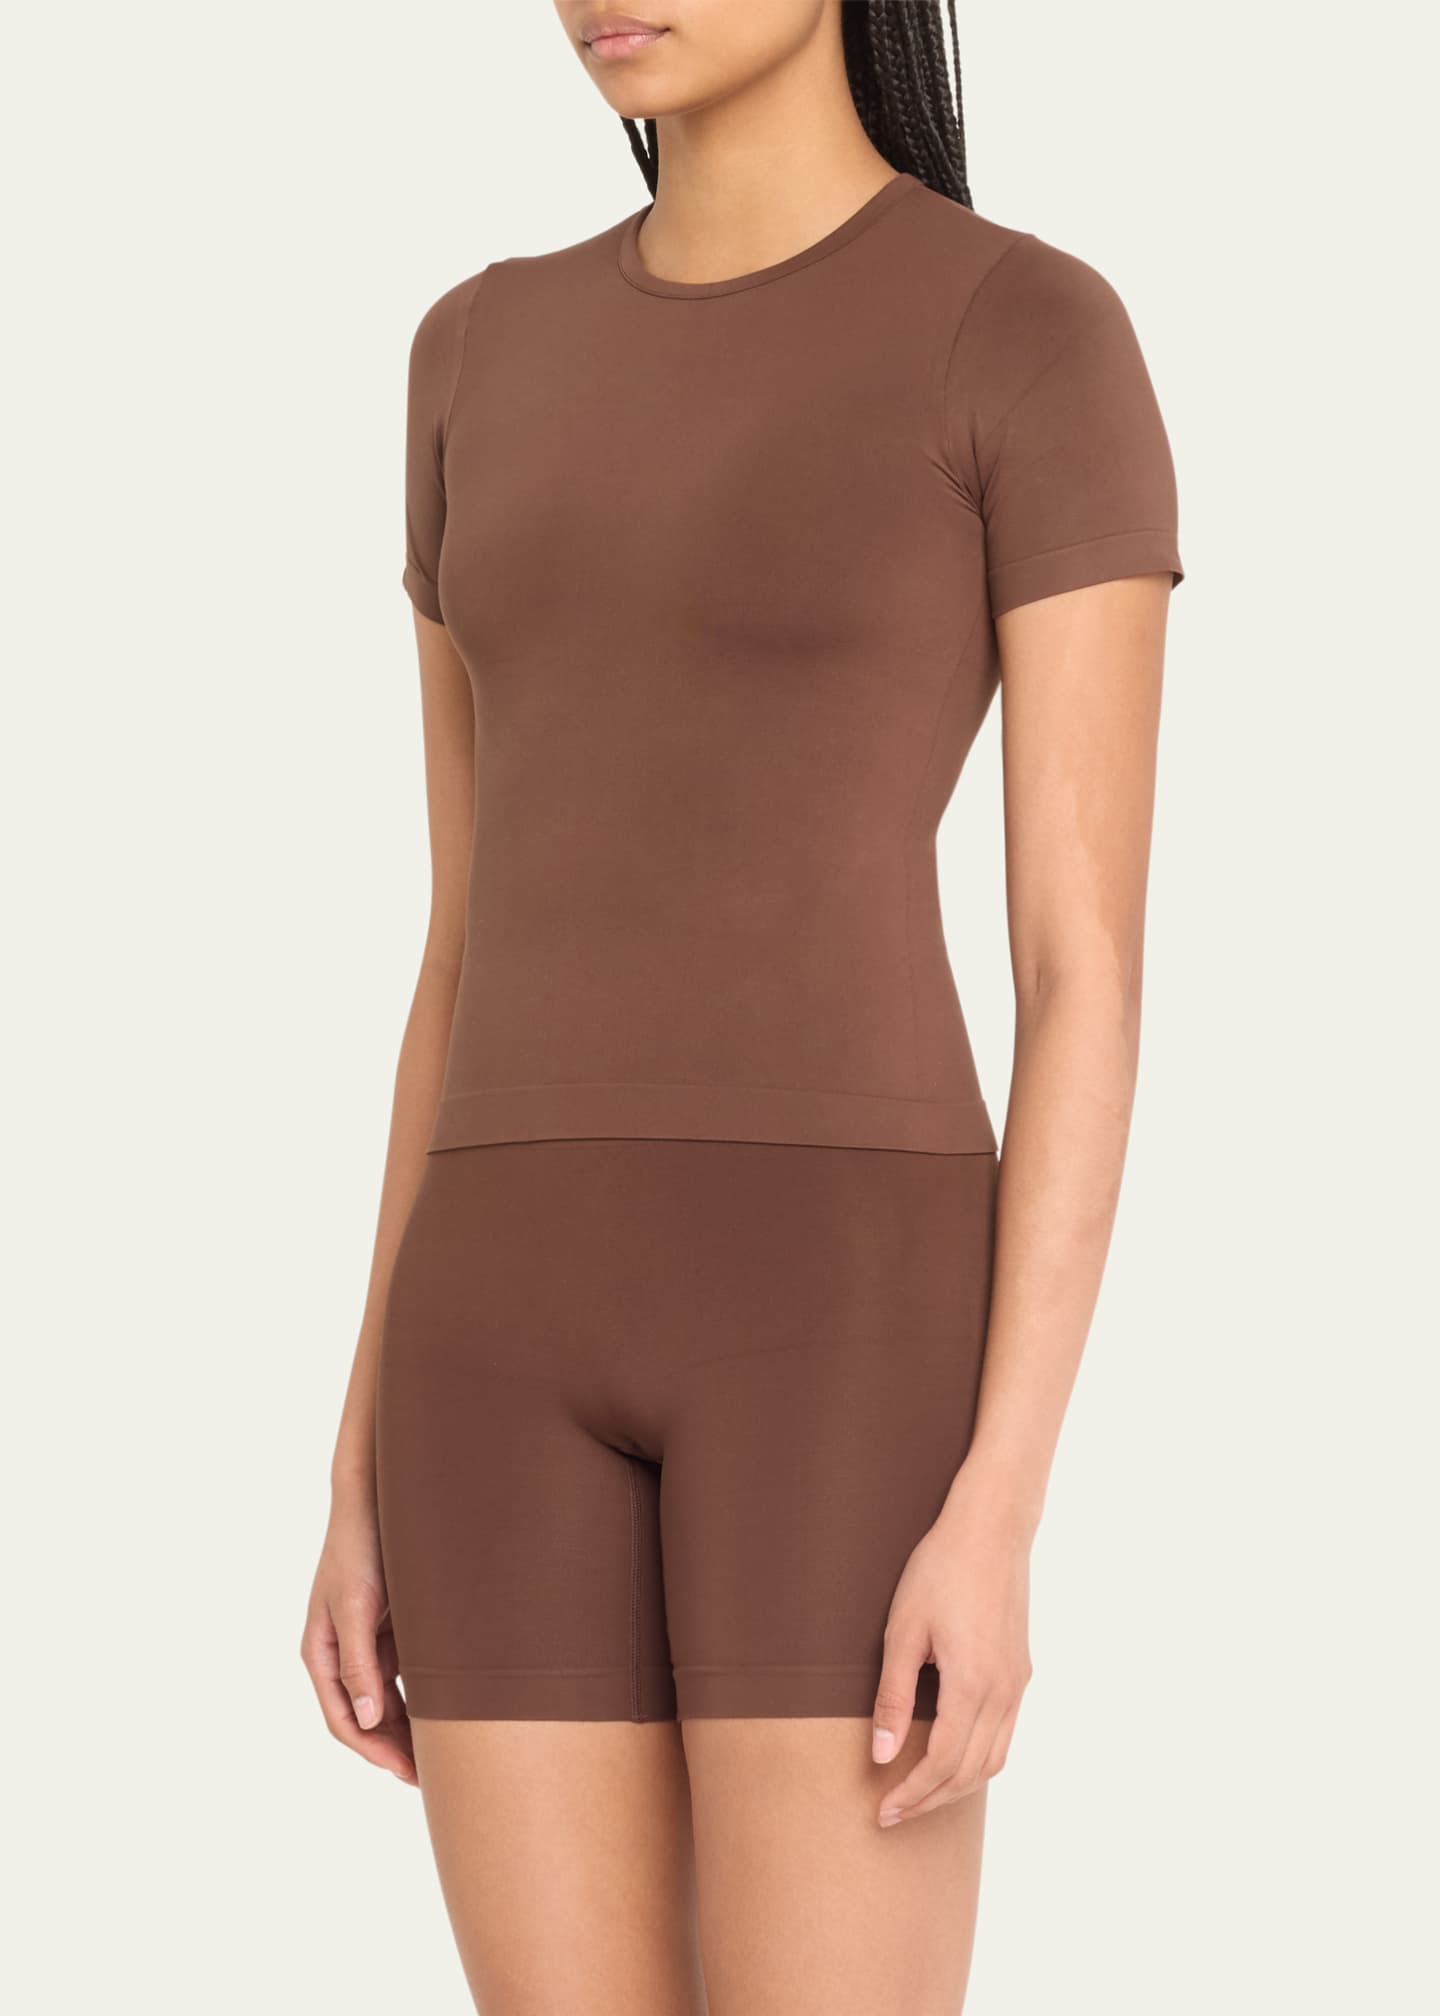 The Smoothing Seamless T-Shirt